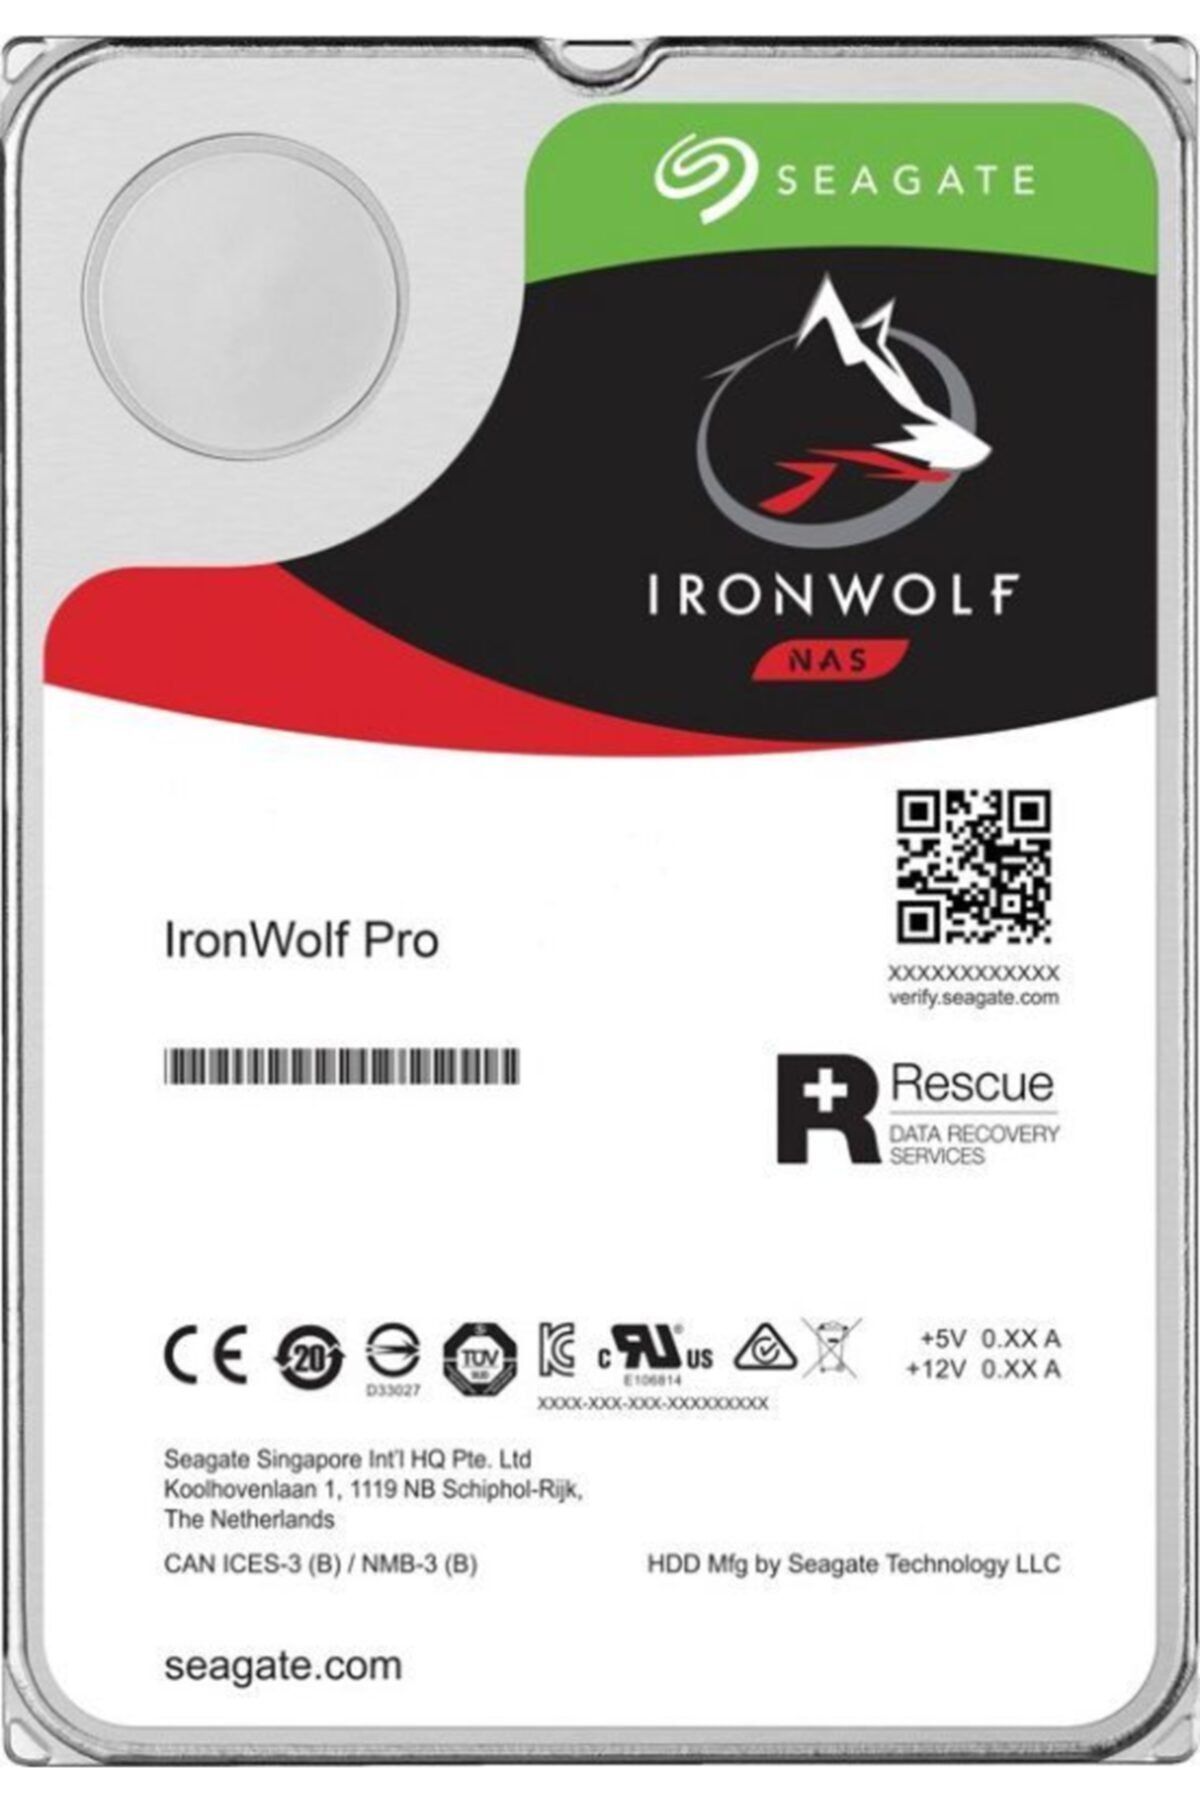 Seagate 12tb Ironwolf 3.5" Nas Dsk 7200 Rpm Sata 6.0 Gb-s 256mb Cache St12000vn0008-2jh101 Harddisk